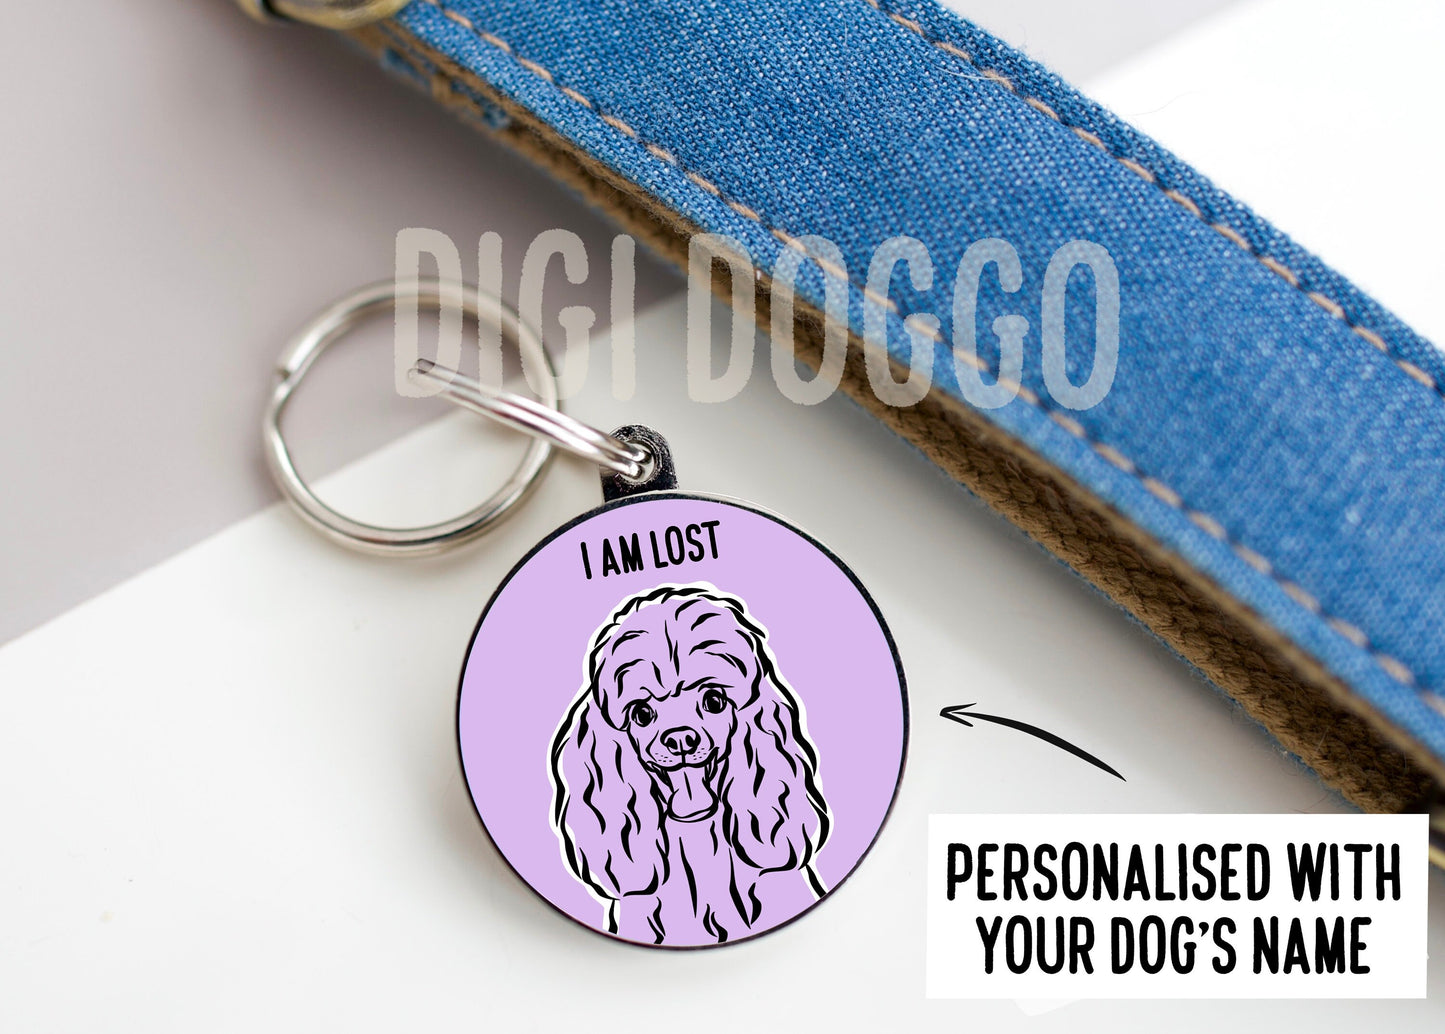 Poodle Outline ID Tag/ Personalised Circle Id Dog Tag/ Poodle Portrait Tag/ Cute Gift For Any Poodle Owner/ Trendy Dog Face Charm